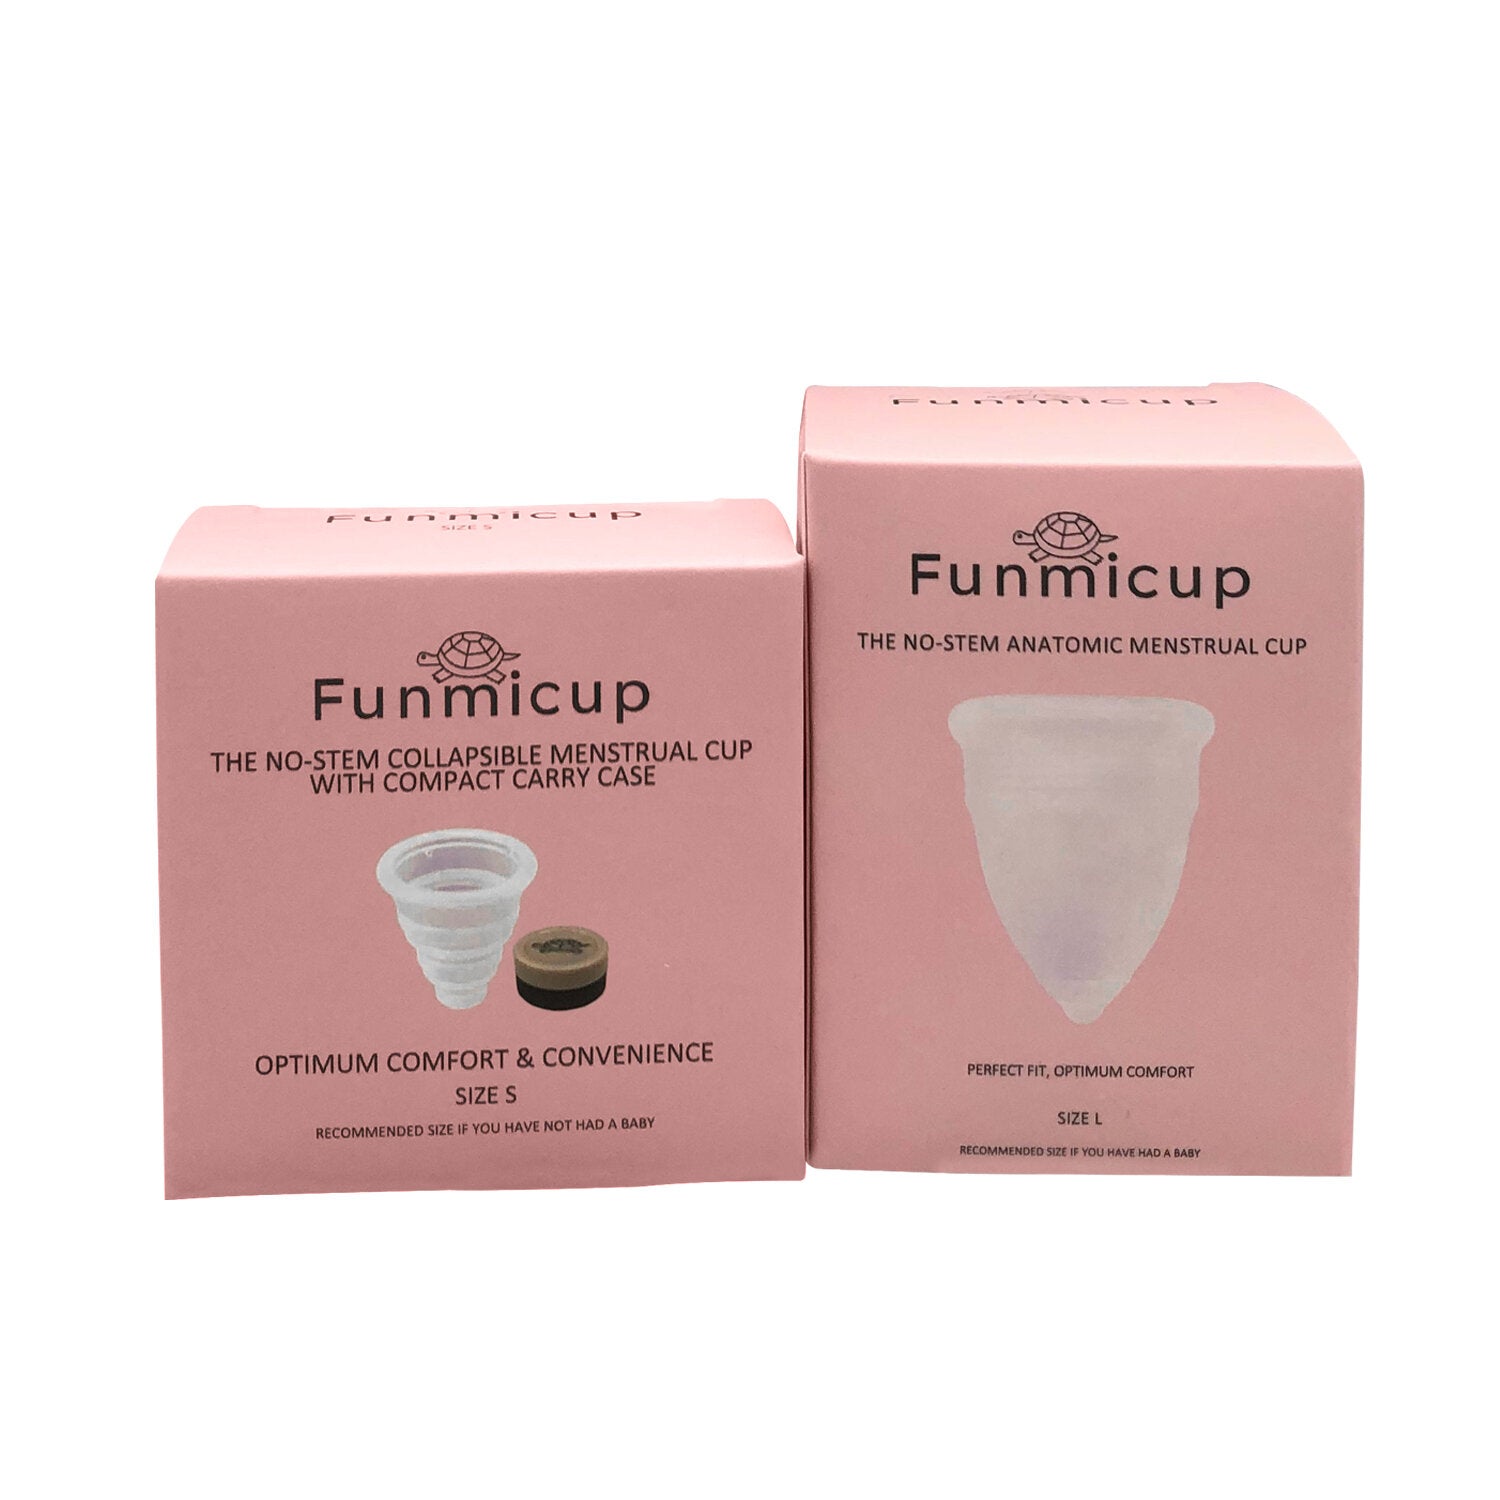 Buy both no-stem menstrual cups and save